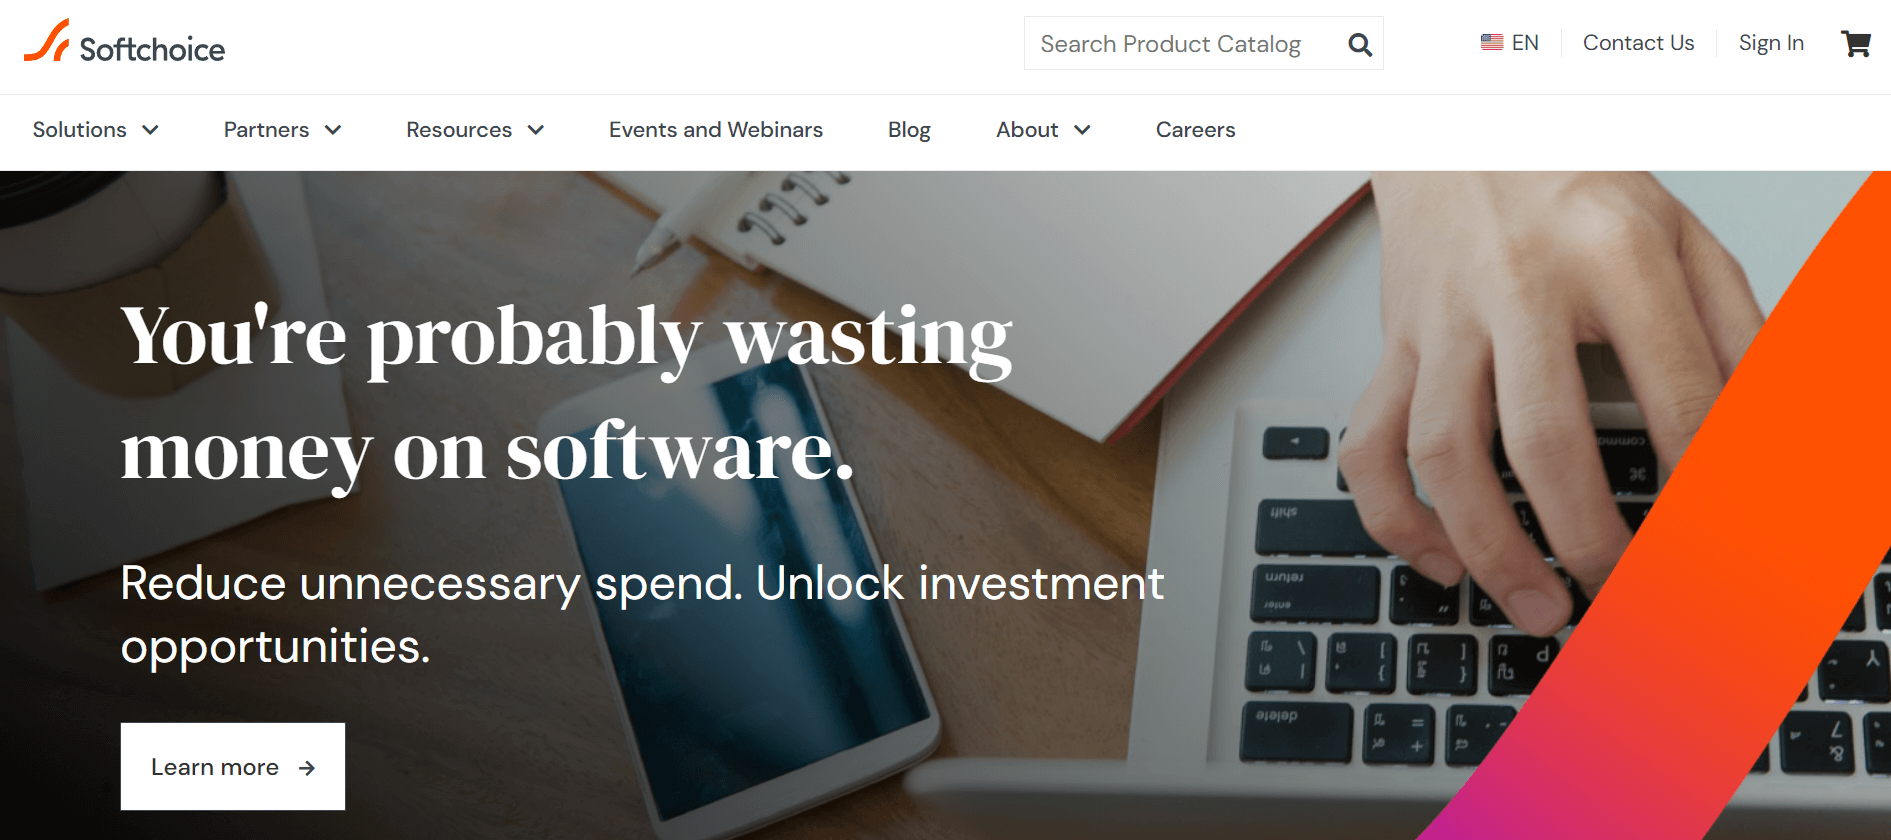 Softchoice homepage: You're probably wasting money on software.